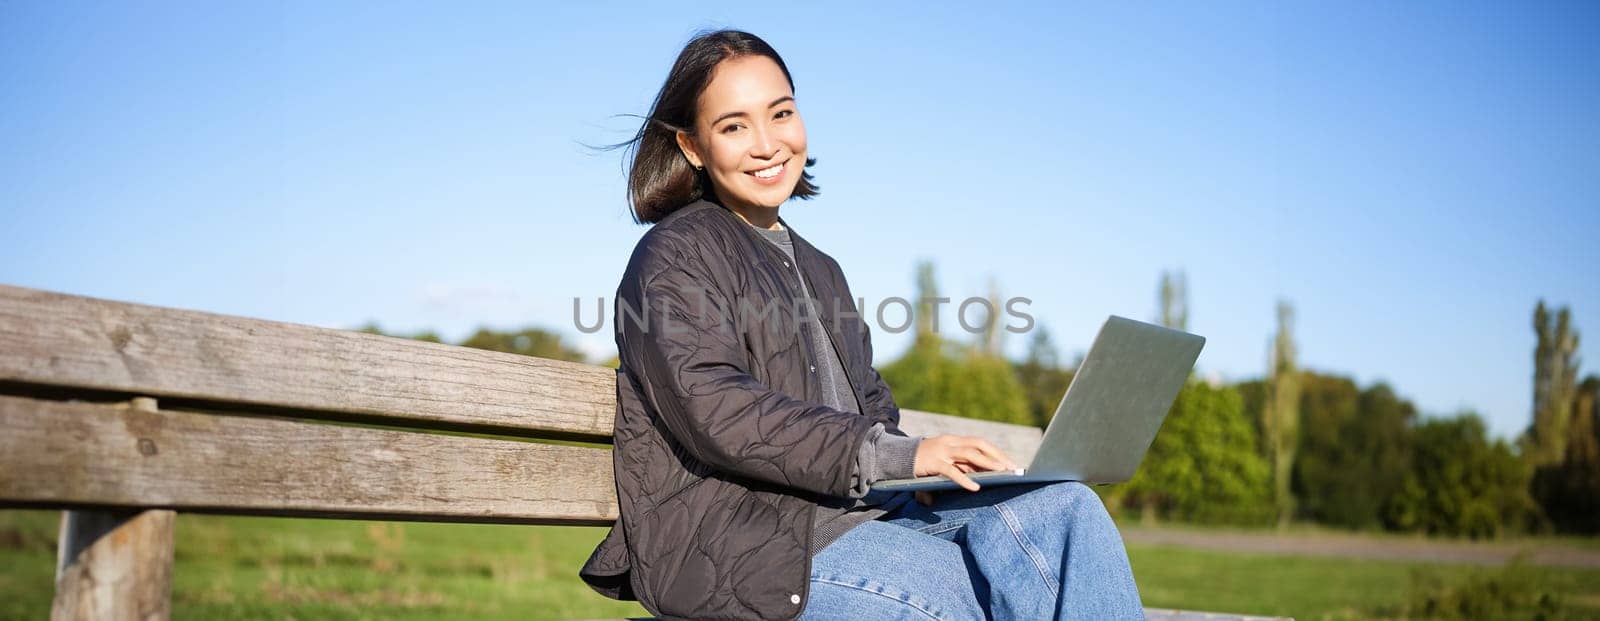 Digital nomad. Portrait of young woman using laptop in park, sitting on bench and working, studying online.